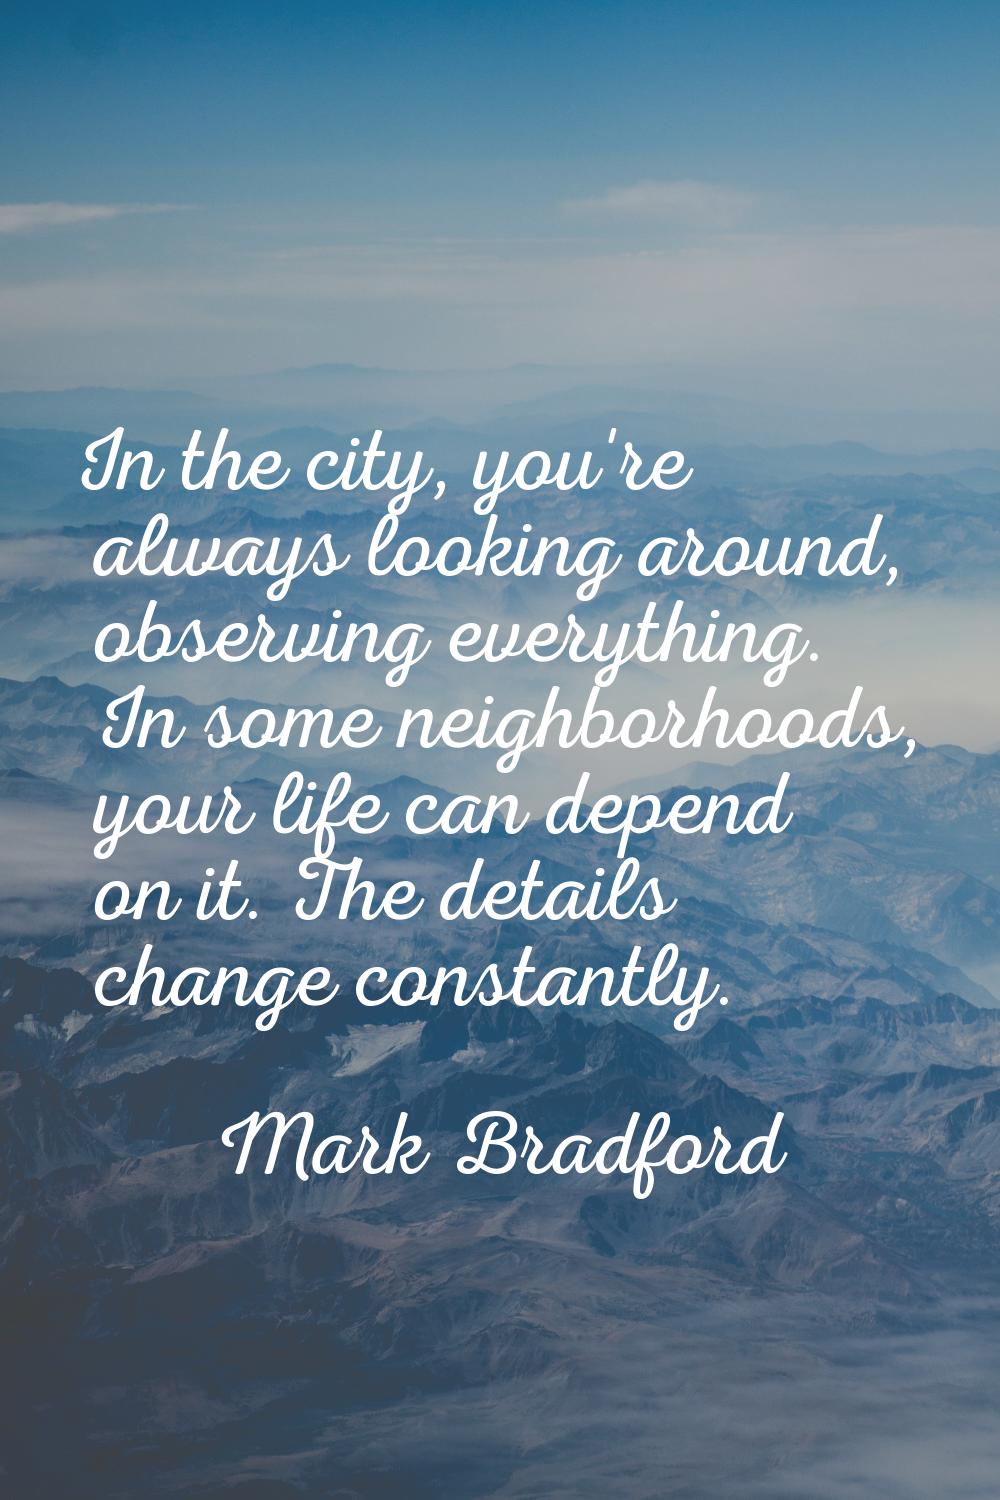 In the city, you're always looking around, observing everything. In some neighborhoods, your life c